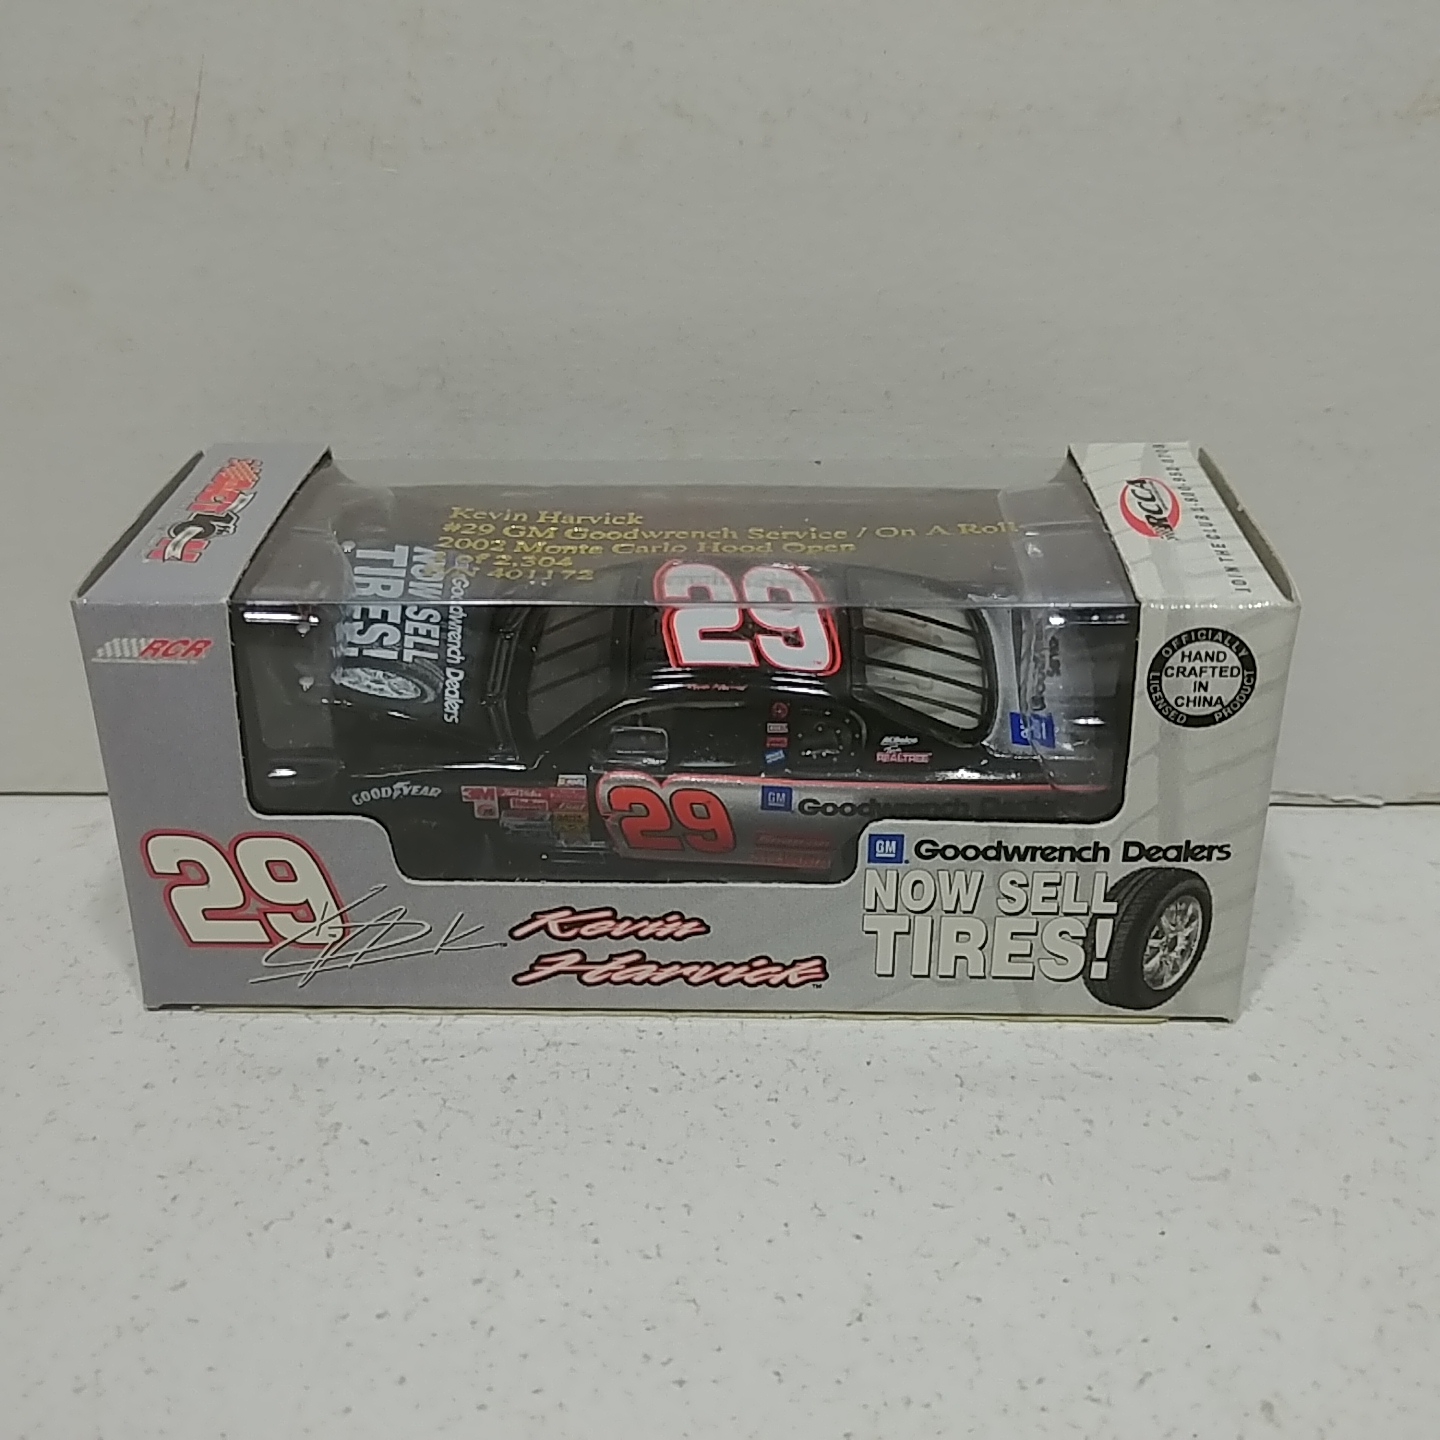 2002 Kevin Harvick 1/64th Goodwrench "Dealers Now Sell Tires" RCCA hood open Monte Carlo